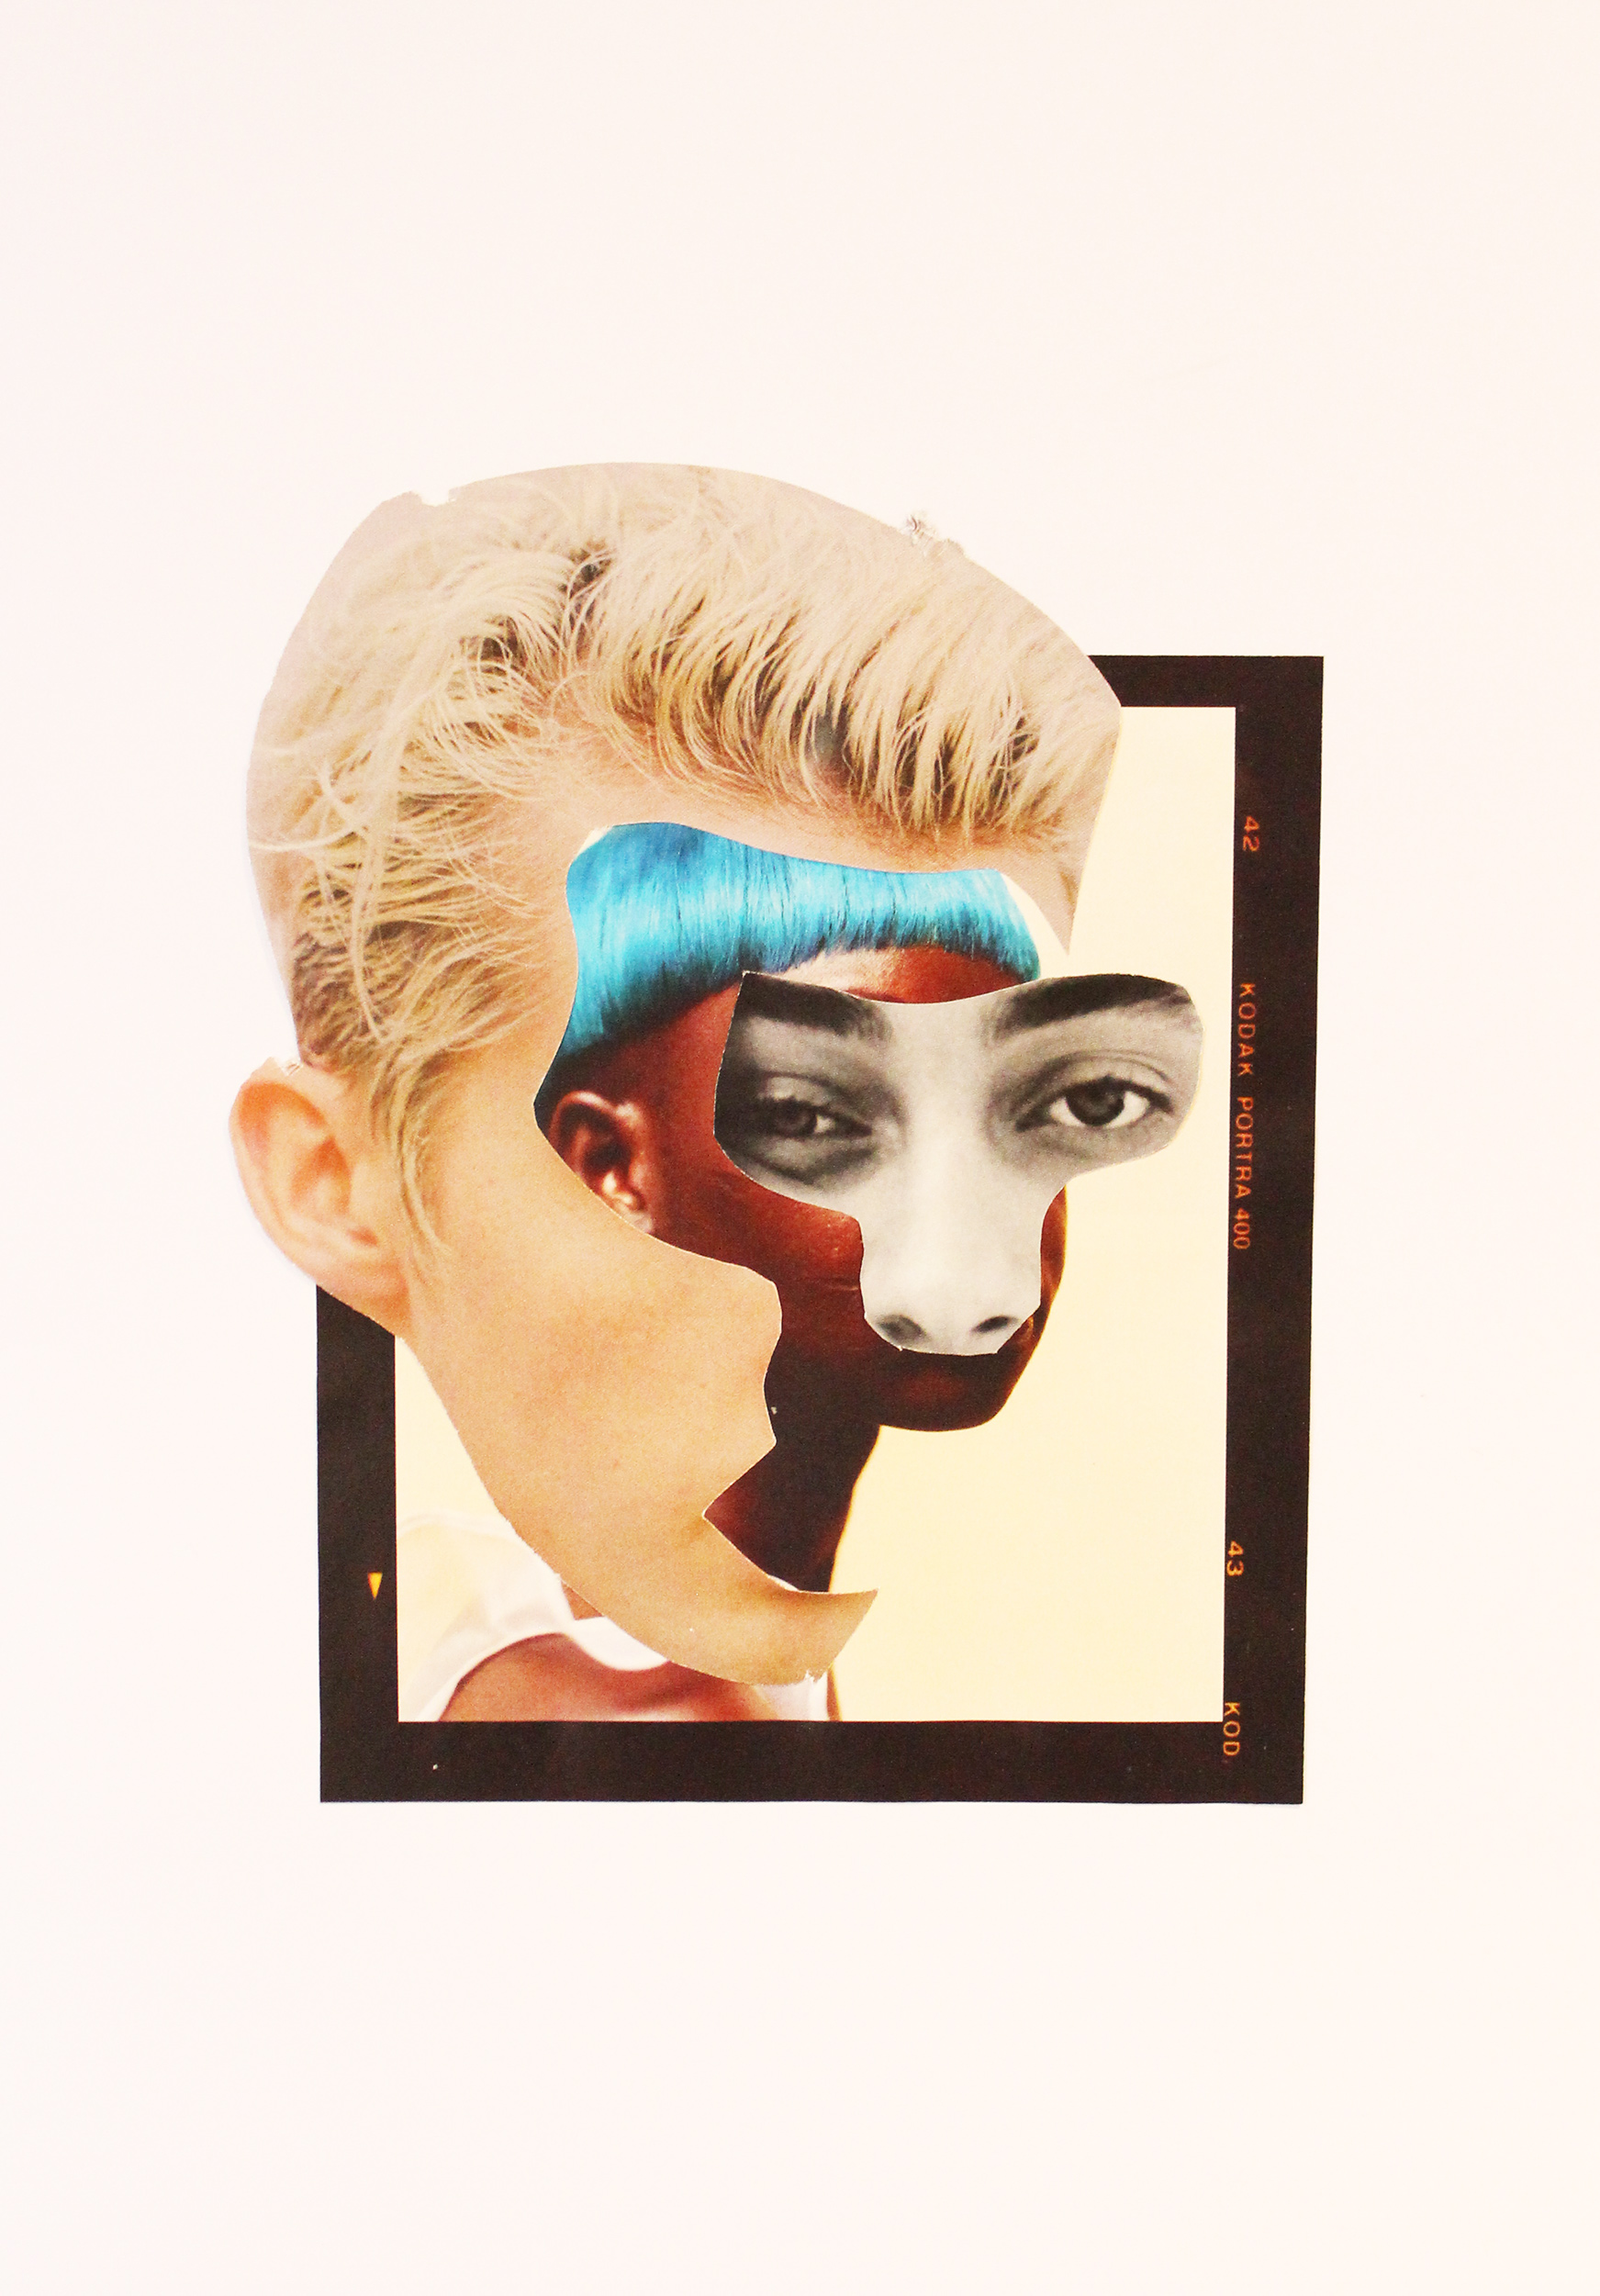 analogue collage by Amelia Brook using found material